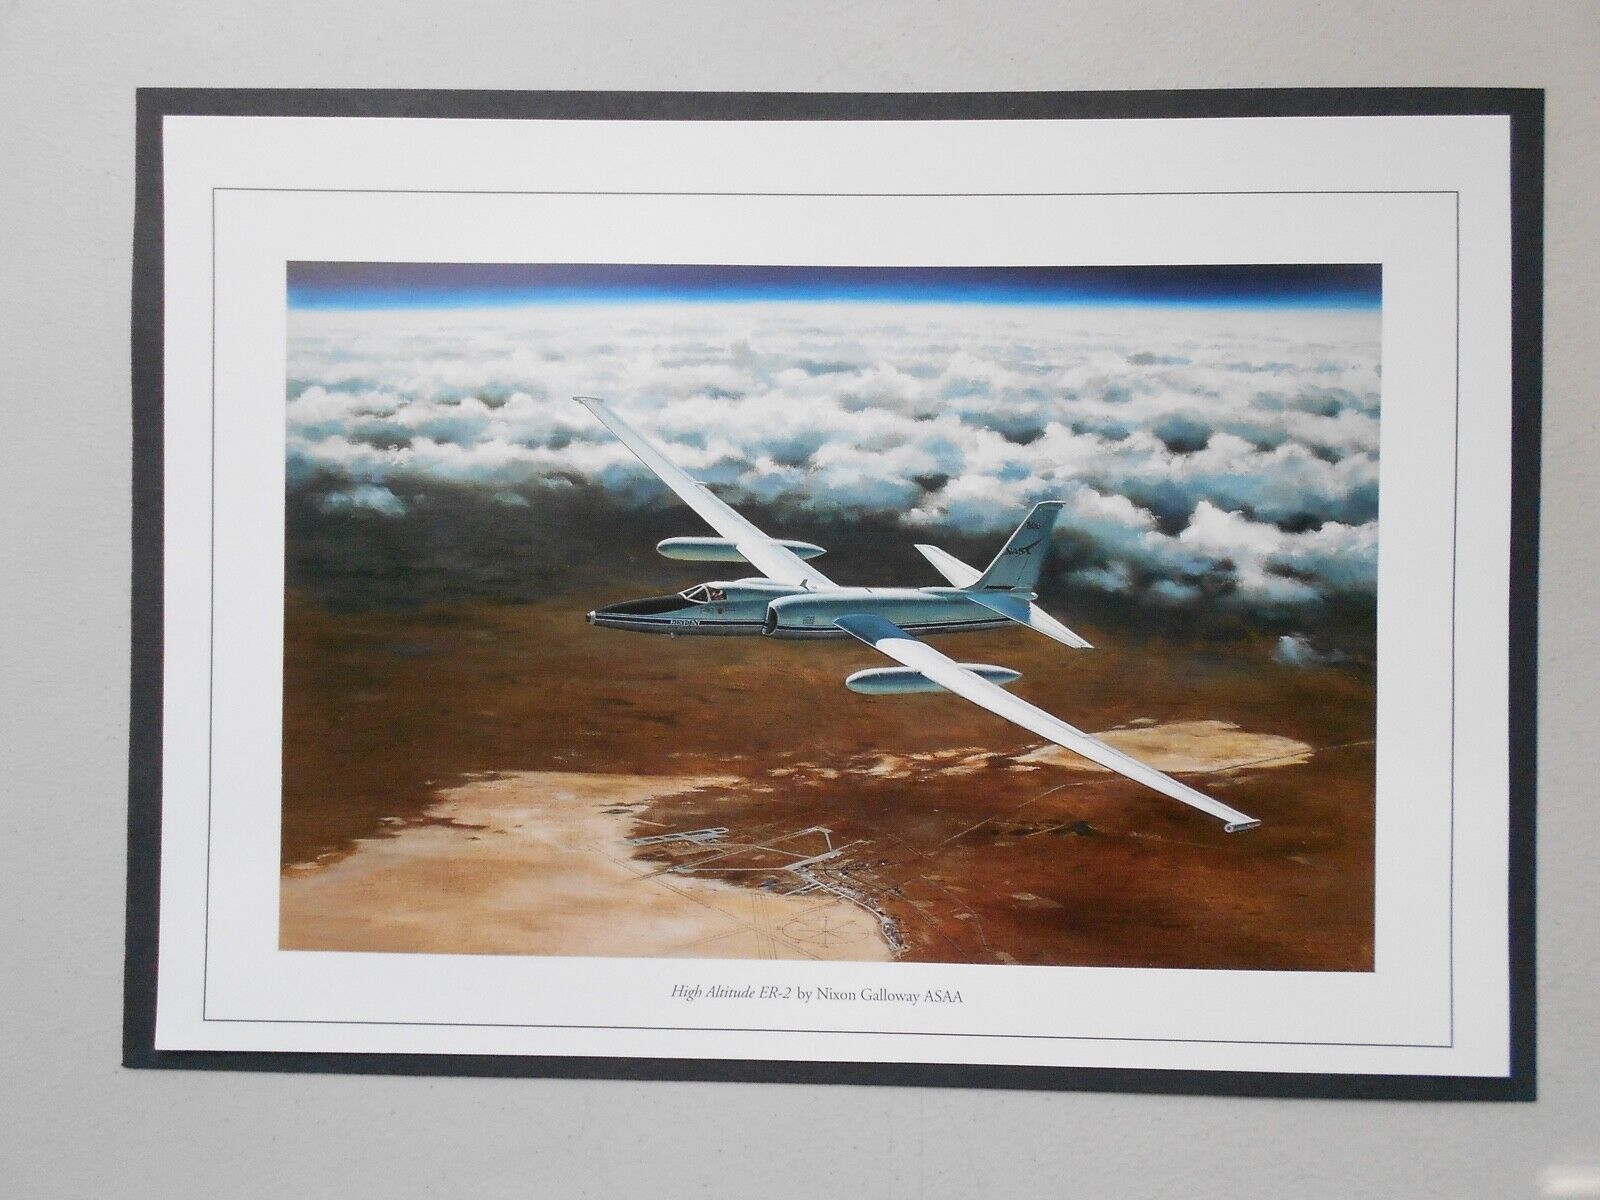 MILITARY AVIATION PRINT-   HIGH ALTITUDE ER-2 BY NIXON GALLOWAY